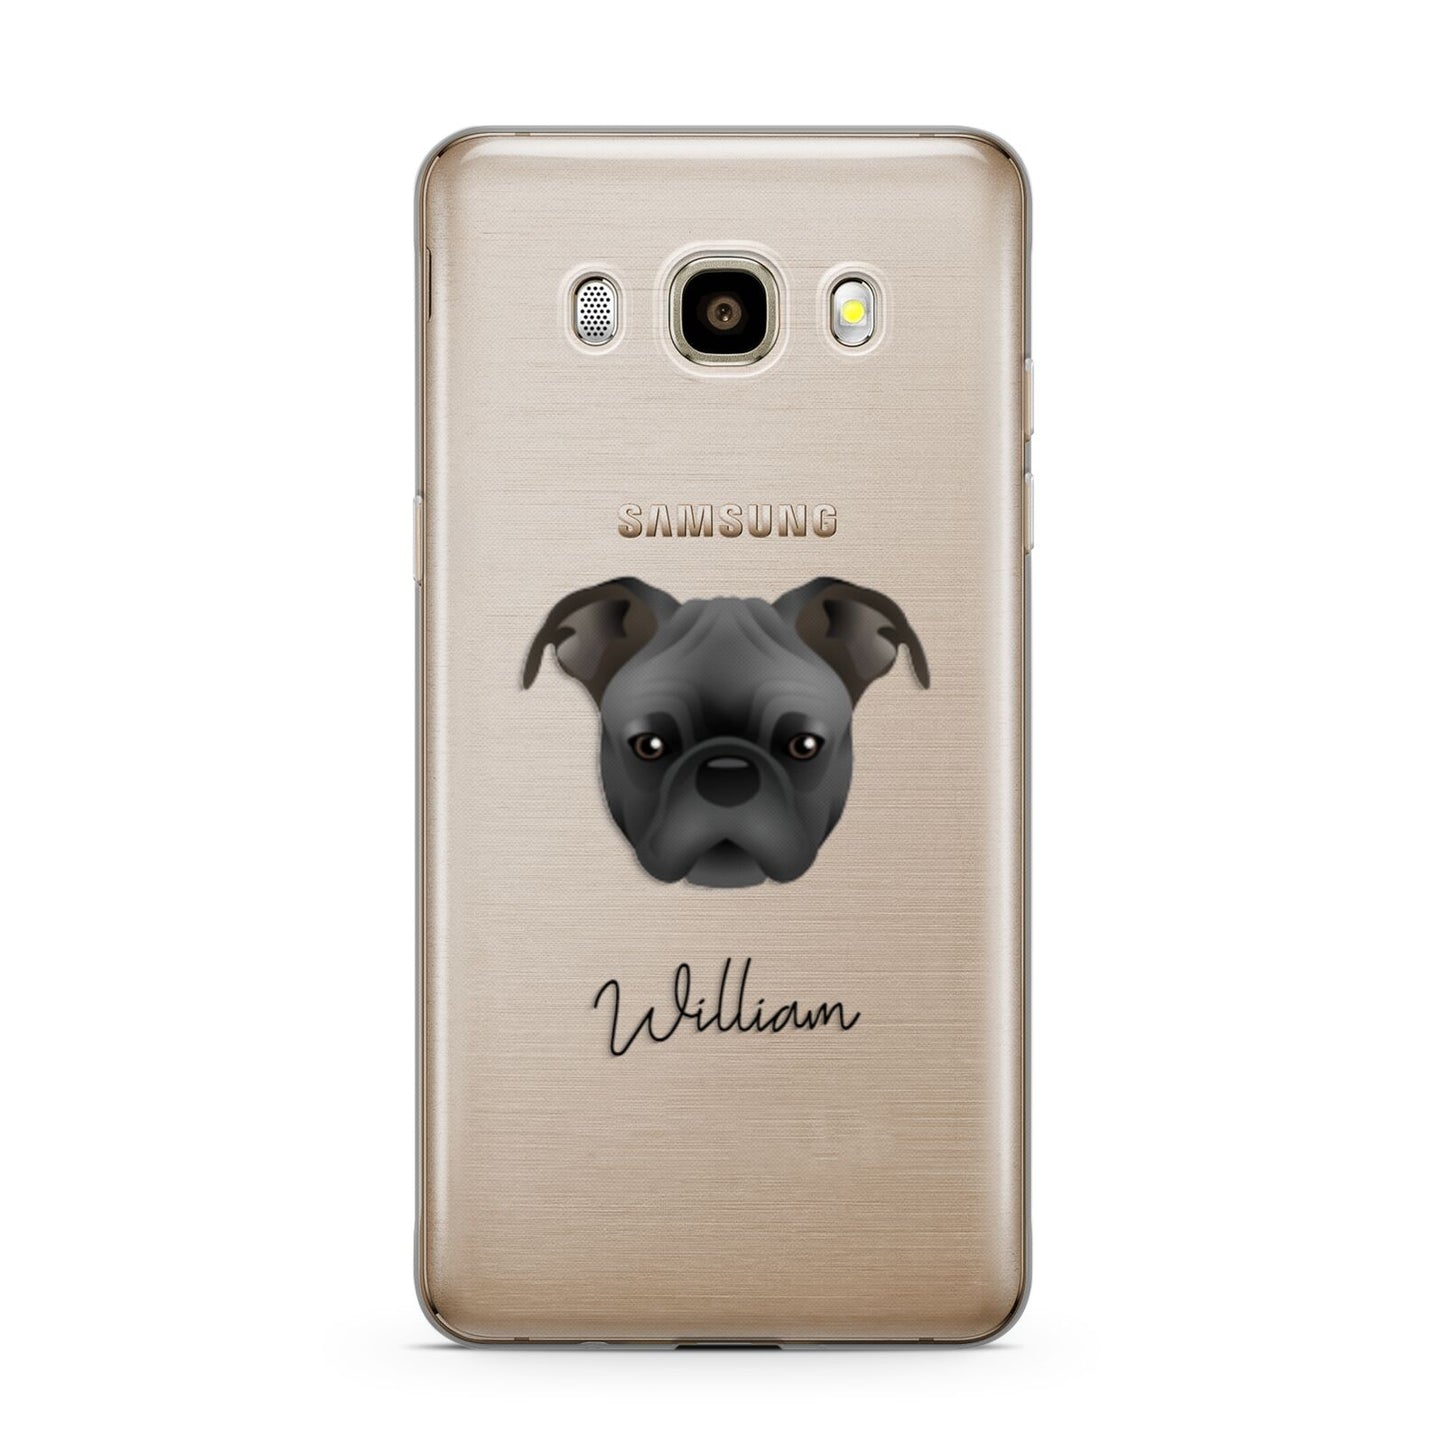 Bugg Personalised Samsung Galaxy J7 2016 Case on gold phone